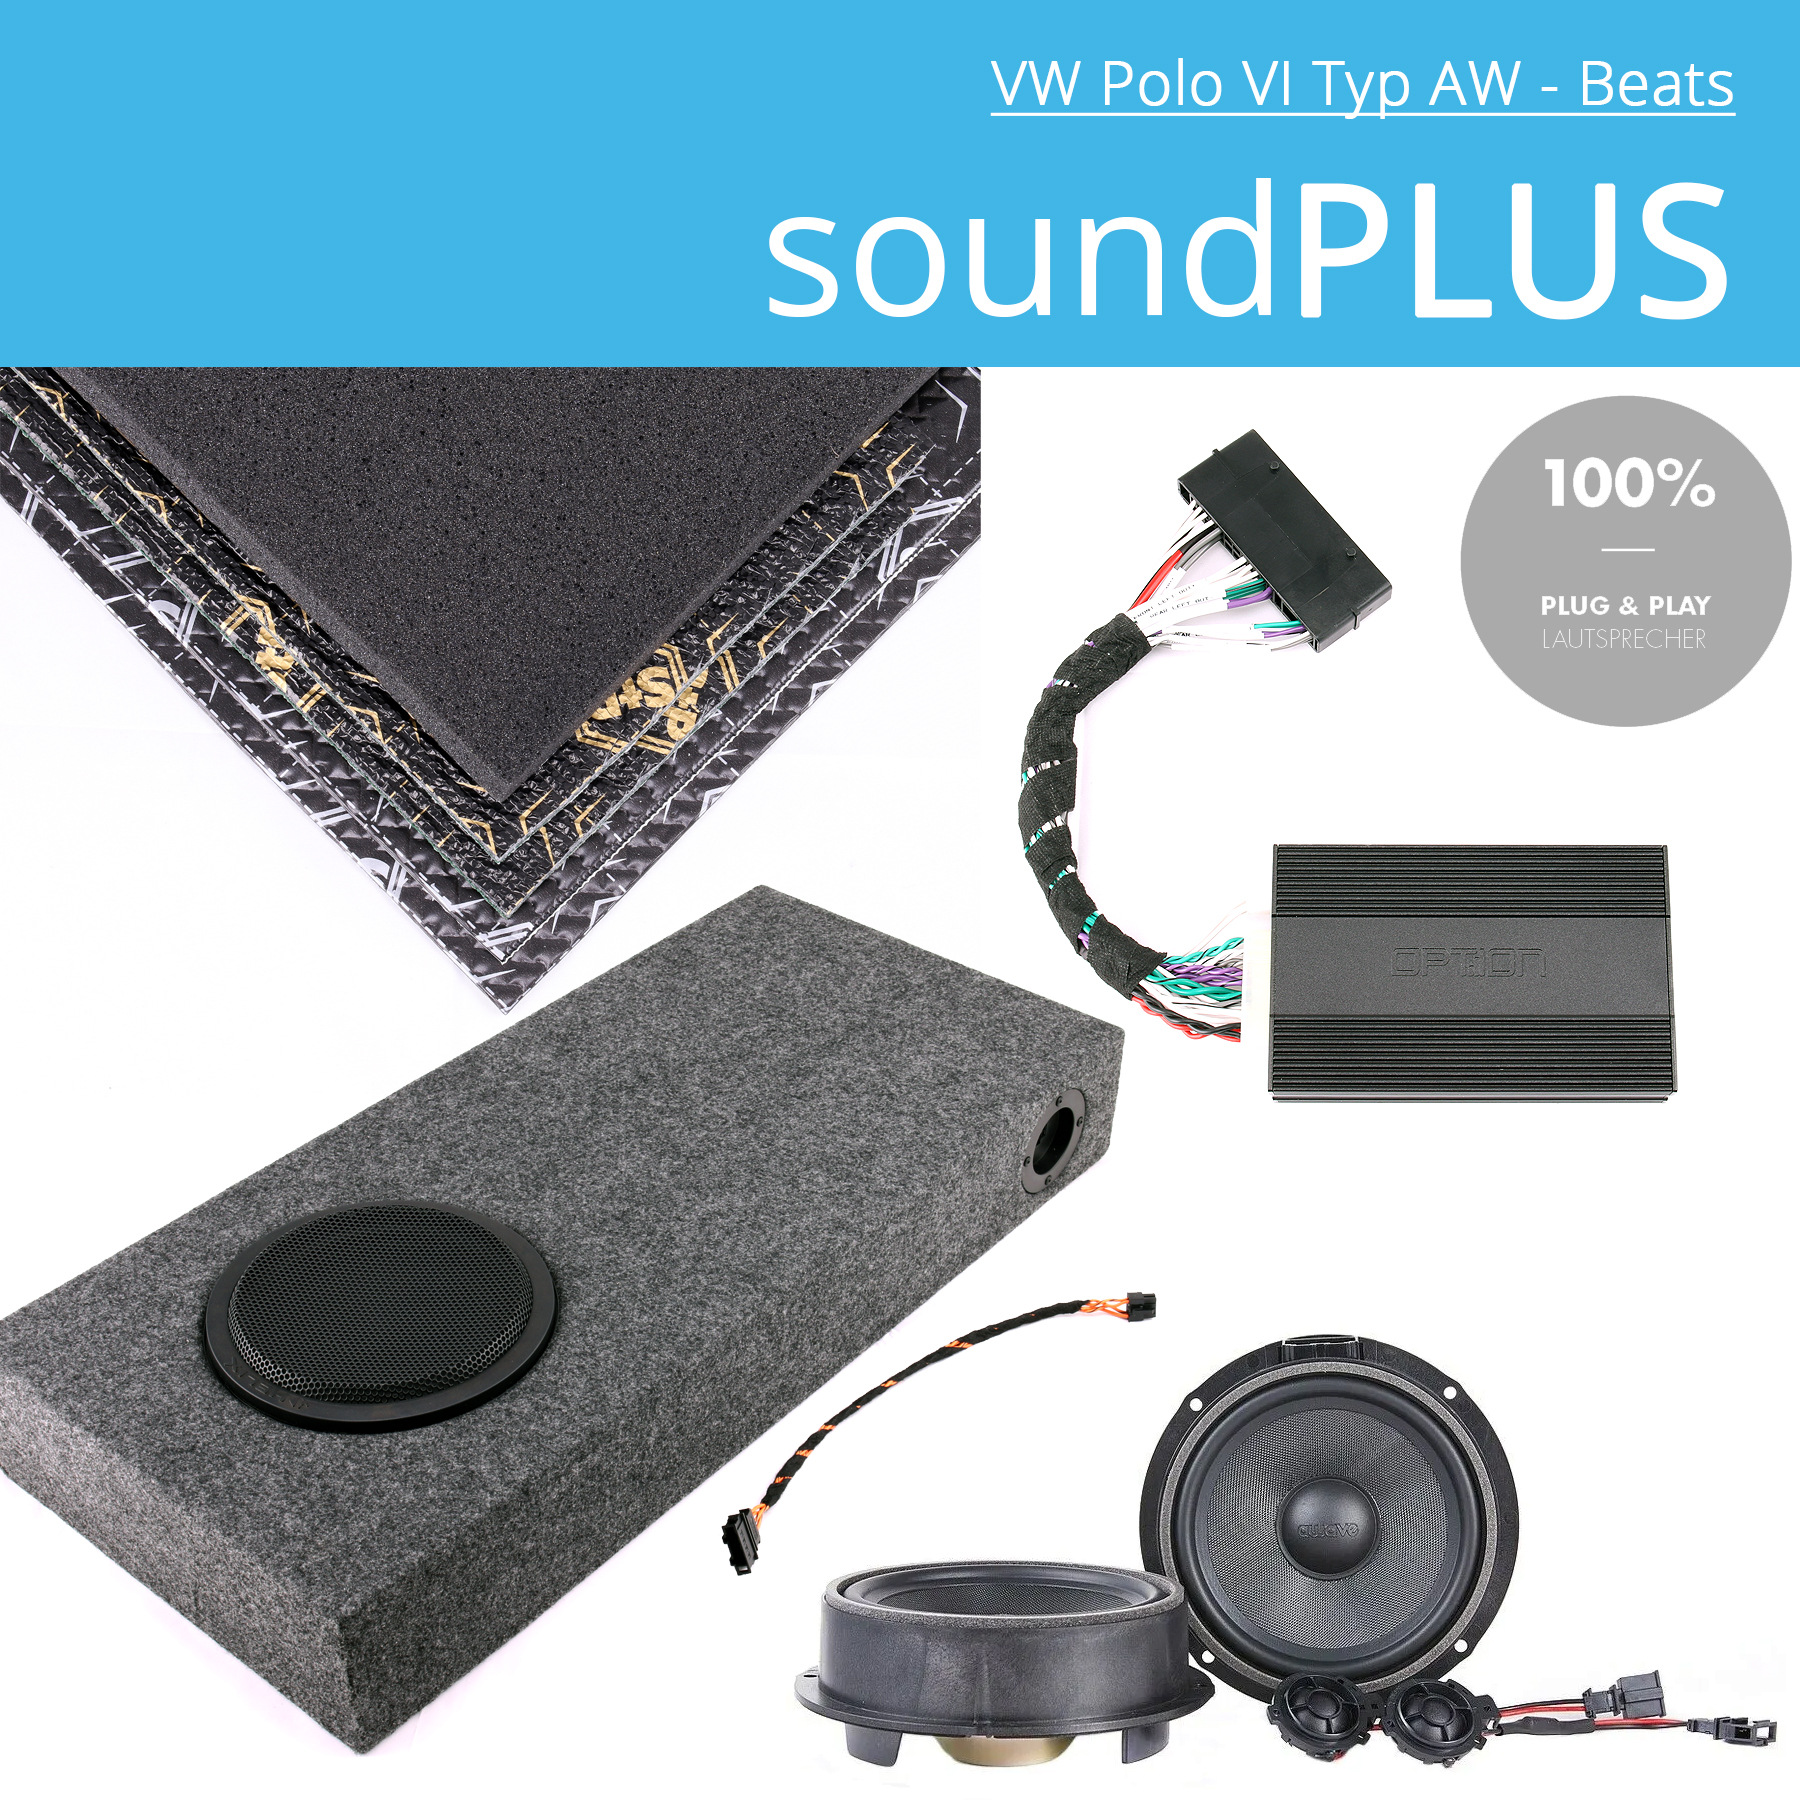 VW Polo 6 AW Beats soundPLUS, 400W DSP Endstufen Upgrade System mit  Subwoofer